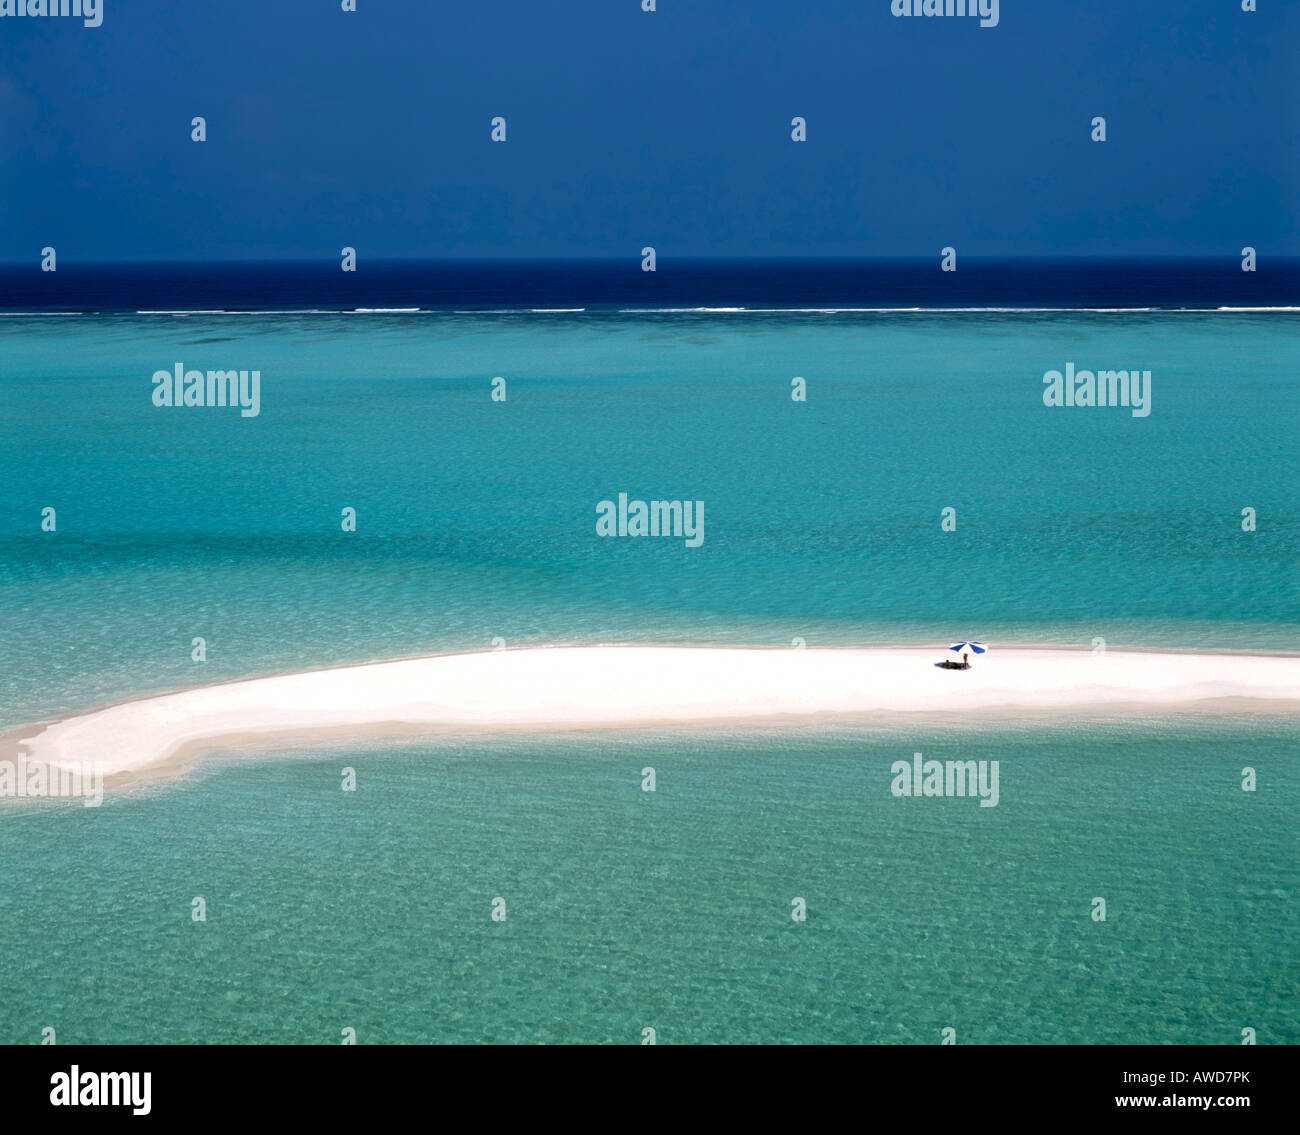 Aerial view of lone sun umbrella on a sand bank, lagoon, turquoise waters, Maldives, Indian Ocean Stock Photo